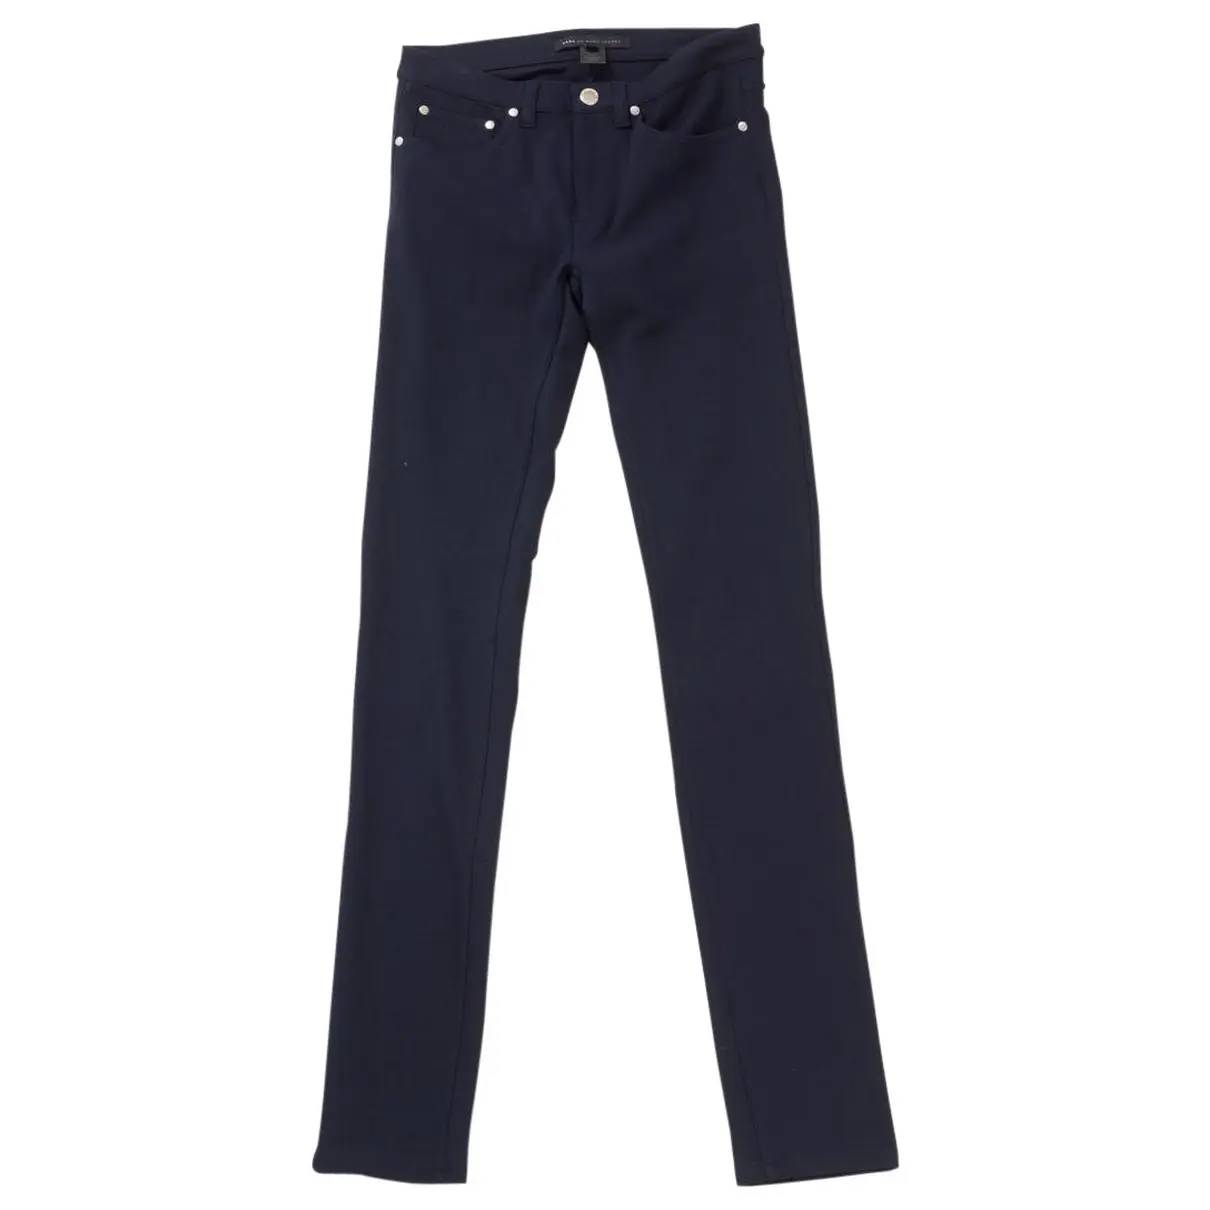 Blue Trousers Marc by Marc Jacobs